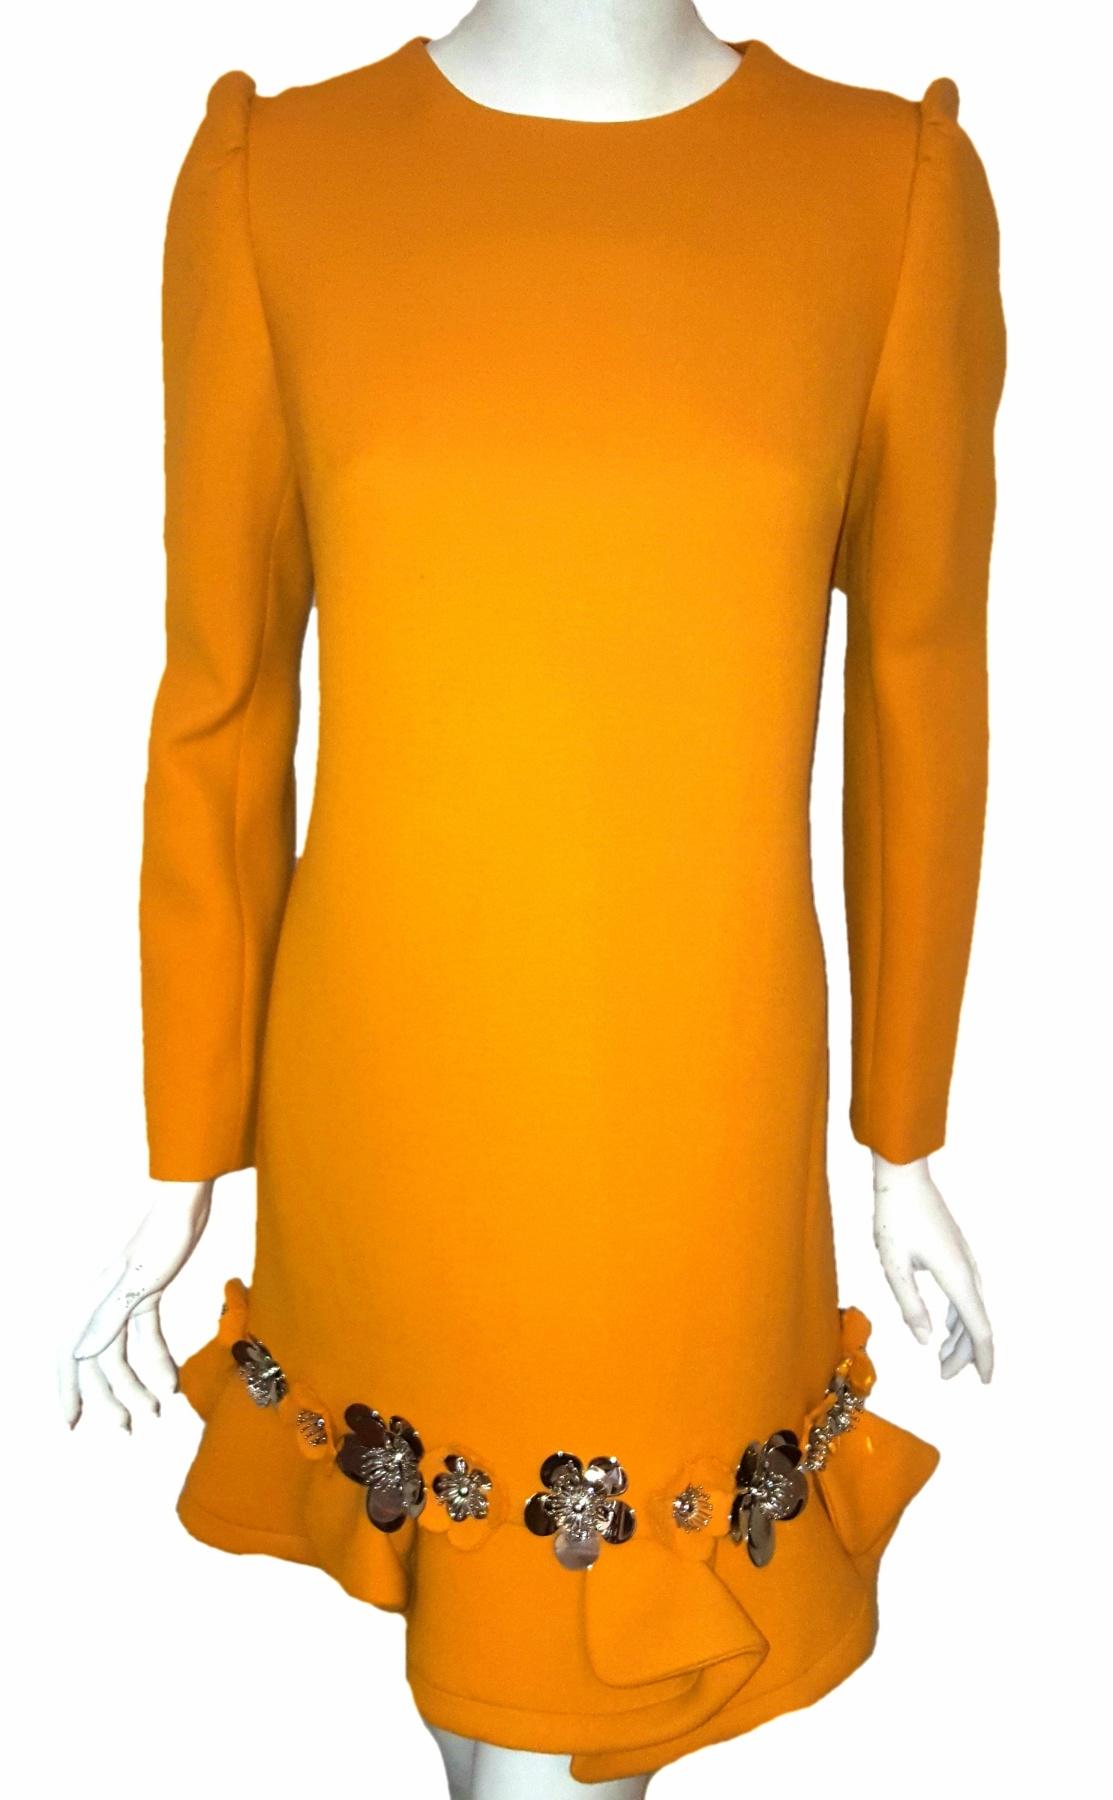 Miu Miu butternut squash long sleeve dress with floral decorations adorning the hemline of this dress continues the sweet fragrance trend of flower petals subtly suggested by scalloped edges.  A full row of silver tone metal flowers that appear